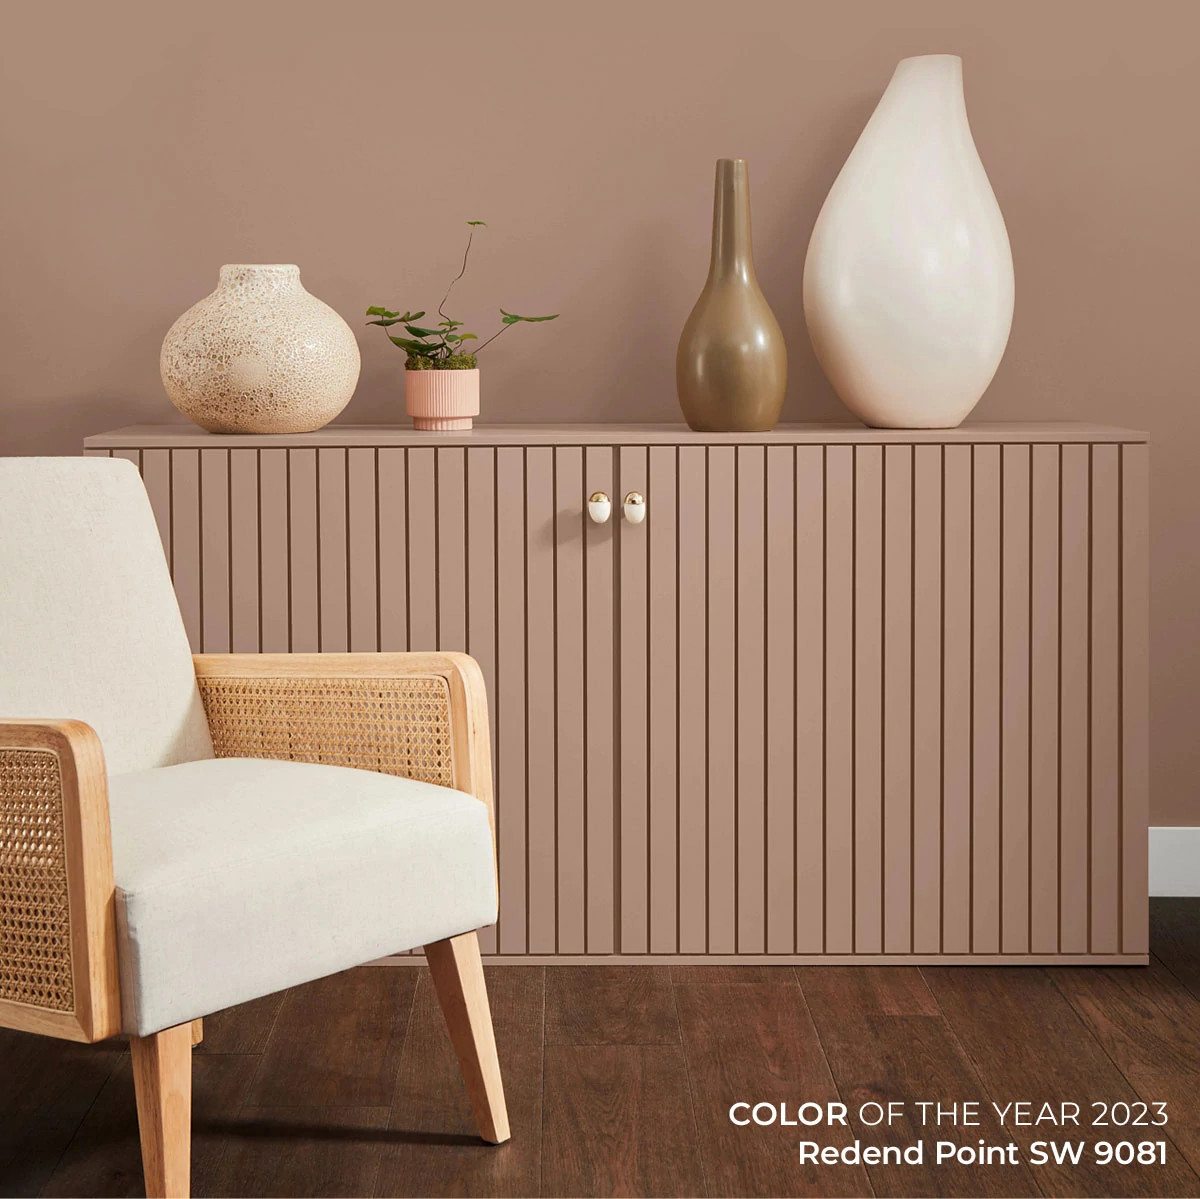 A room painted in Color of the Year 2023 Redend Point SW 9081.